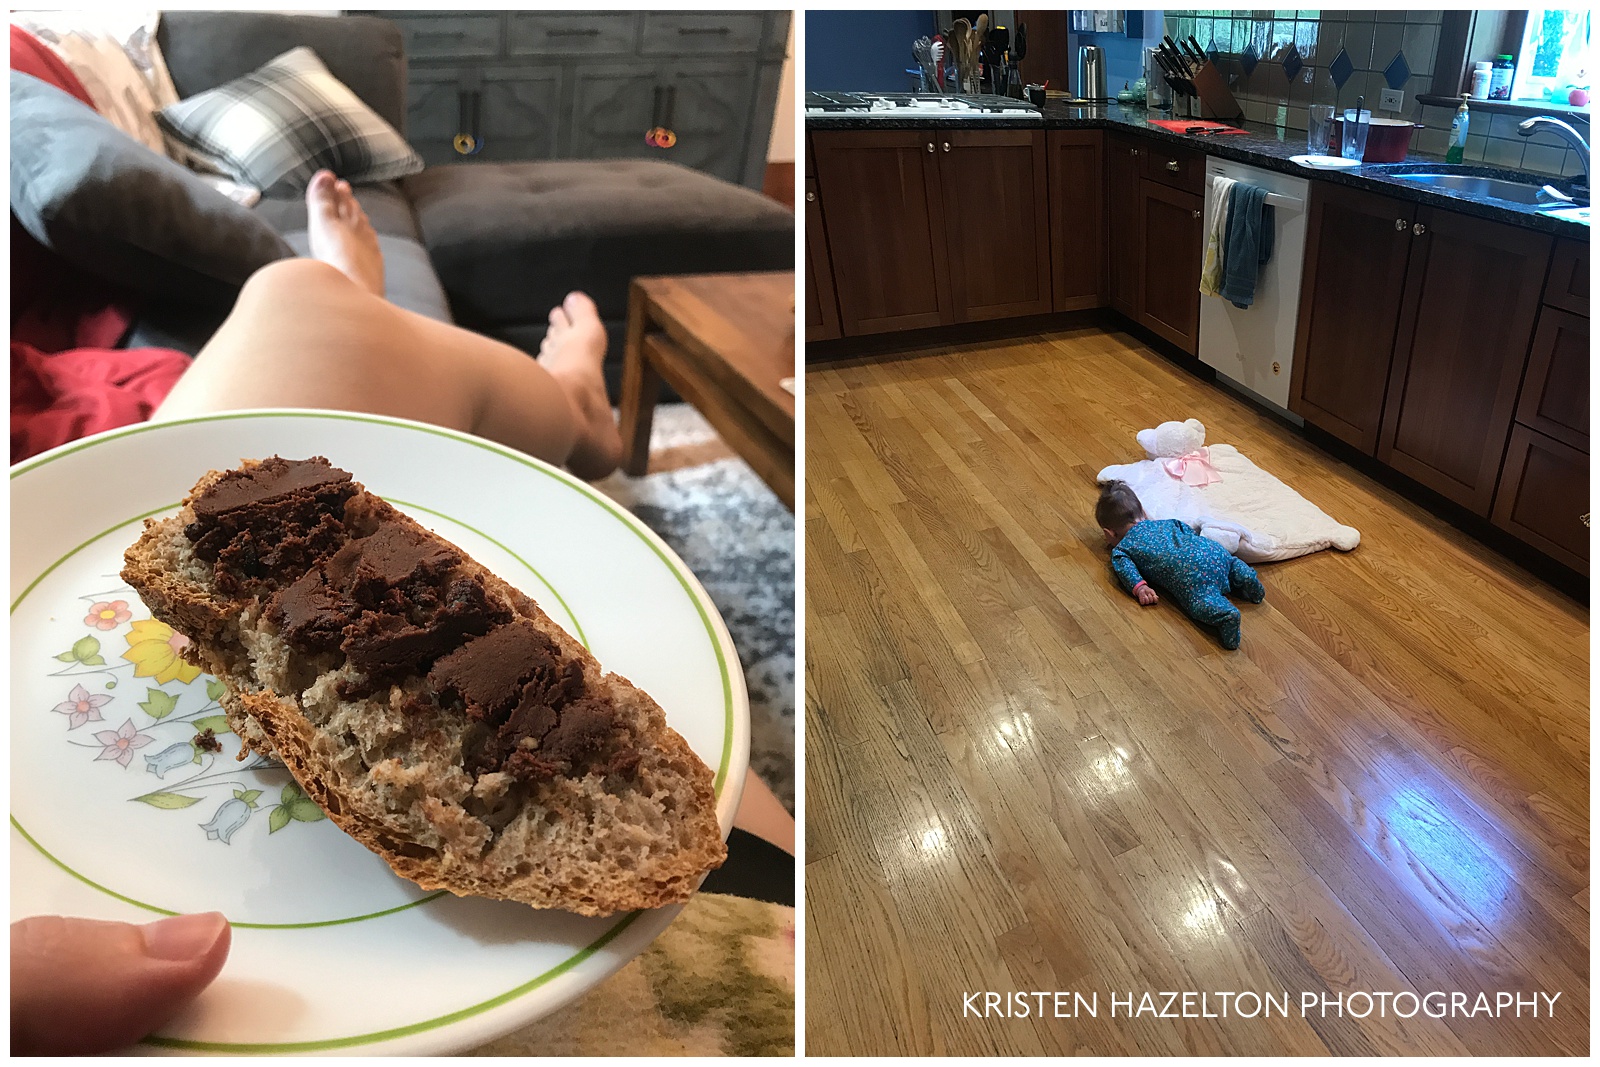 Collage of homemade nutella on homemade bread, and a baby faceplanted on the kitchen floor